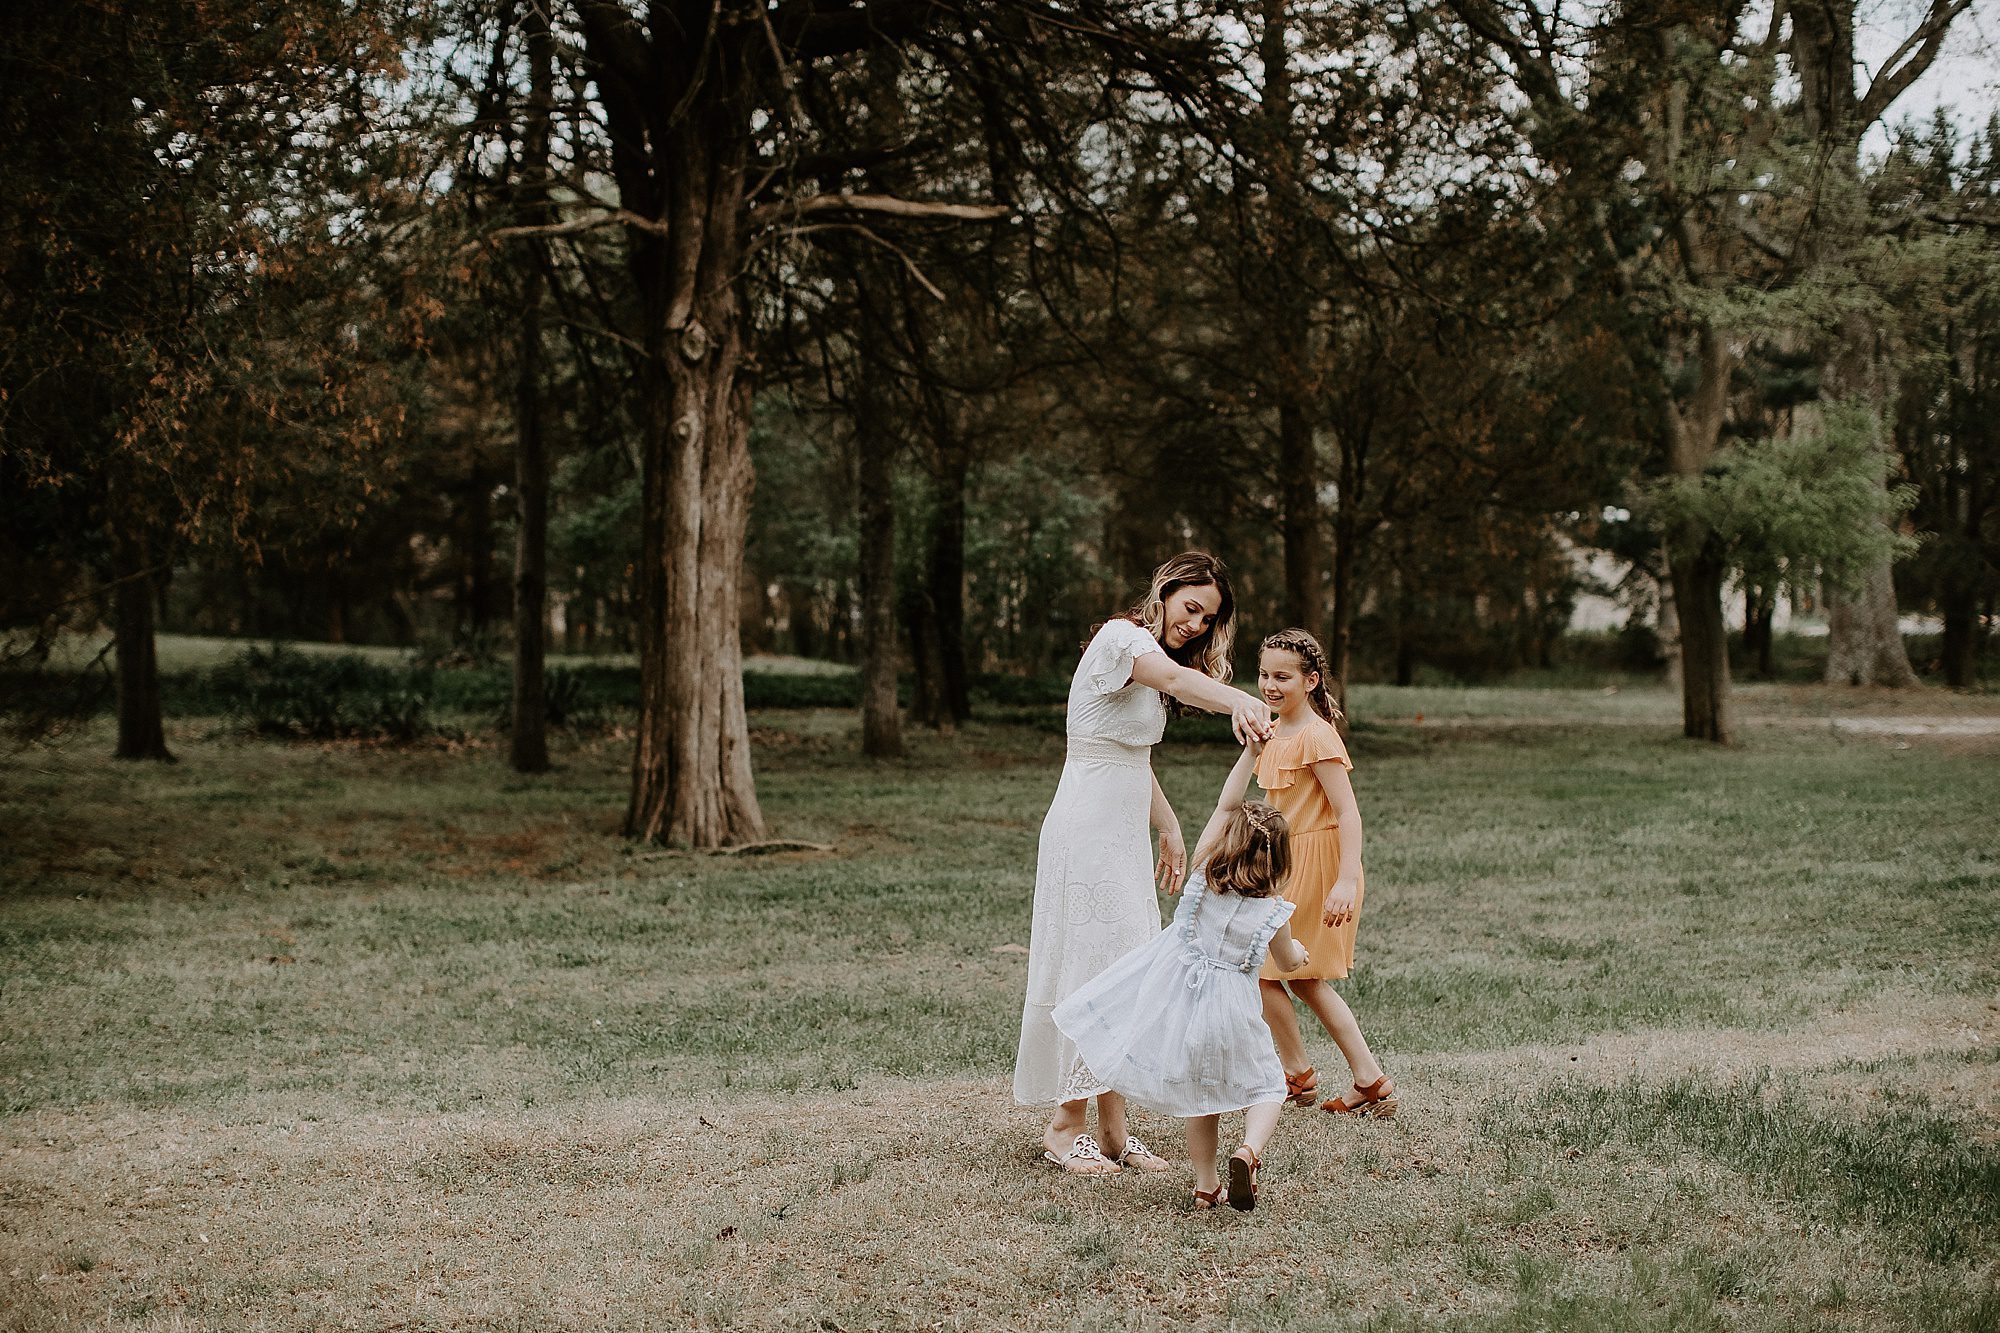 motherhood, mom dancing with daughters, Washington DC Family Photography, Family of 4 Pictures, Sisters, Couple Pictures, Summer and Spring Family Pictures